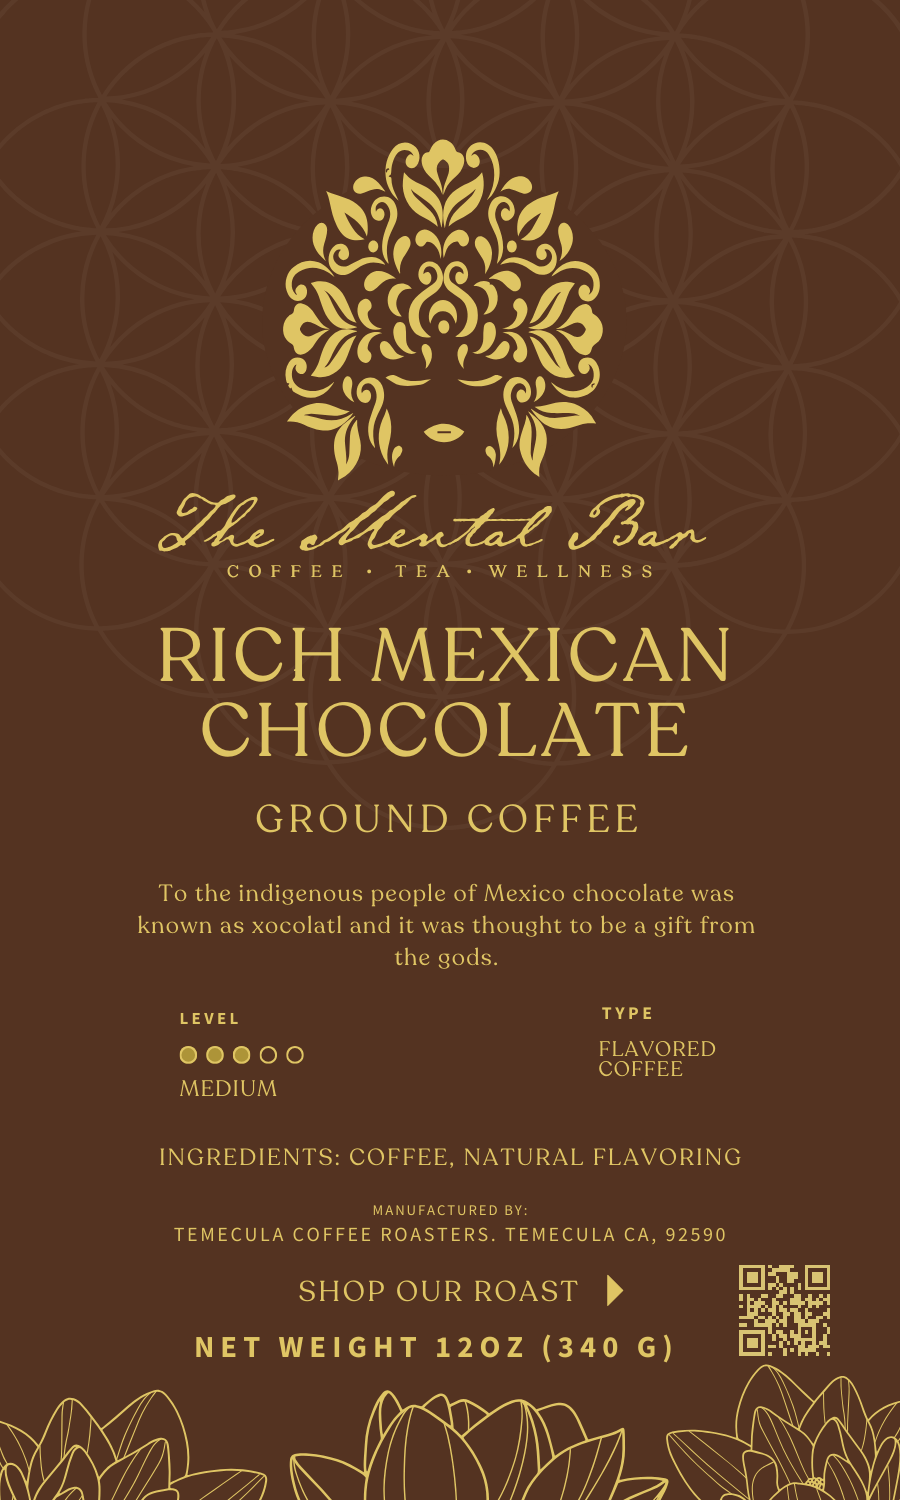 Mexican Chocolate (Mexican Chocolate)